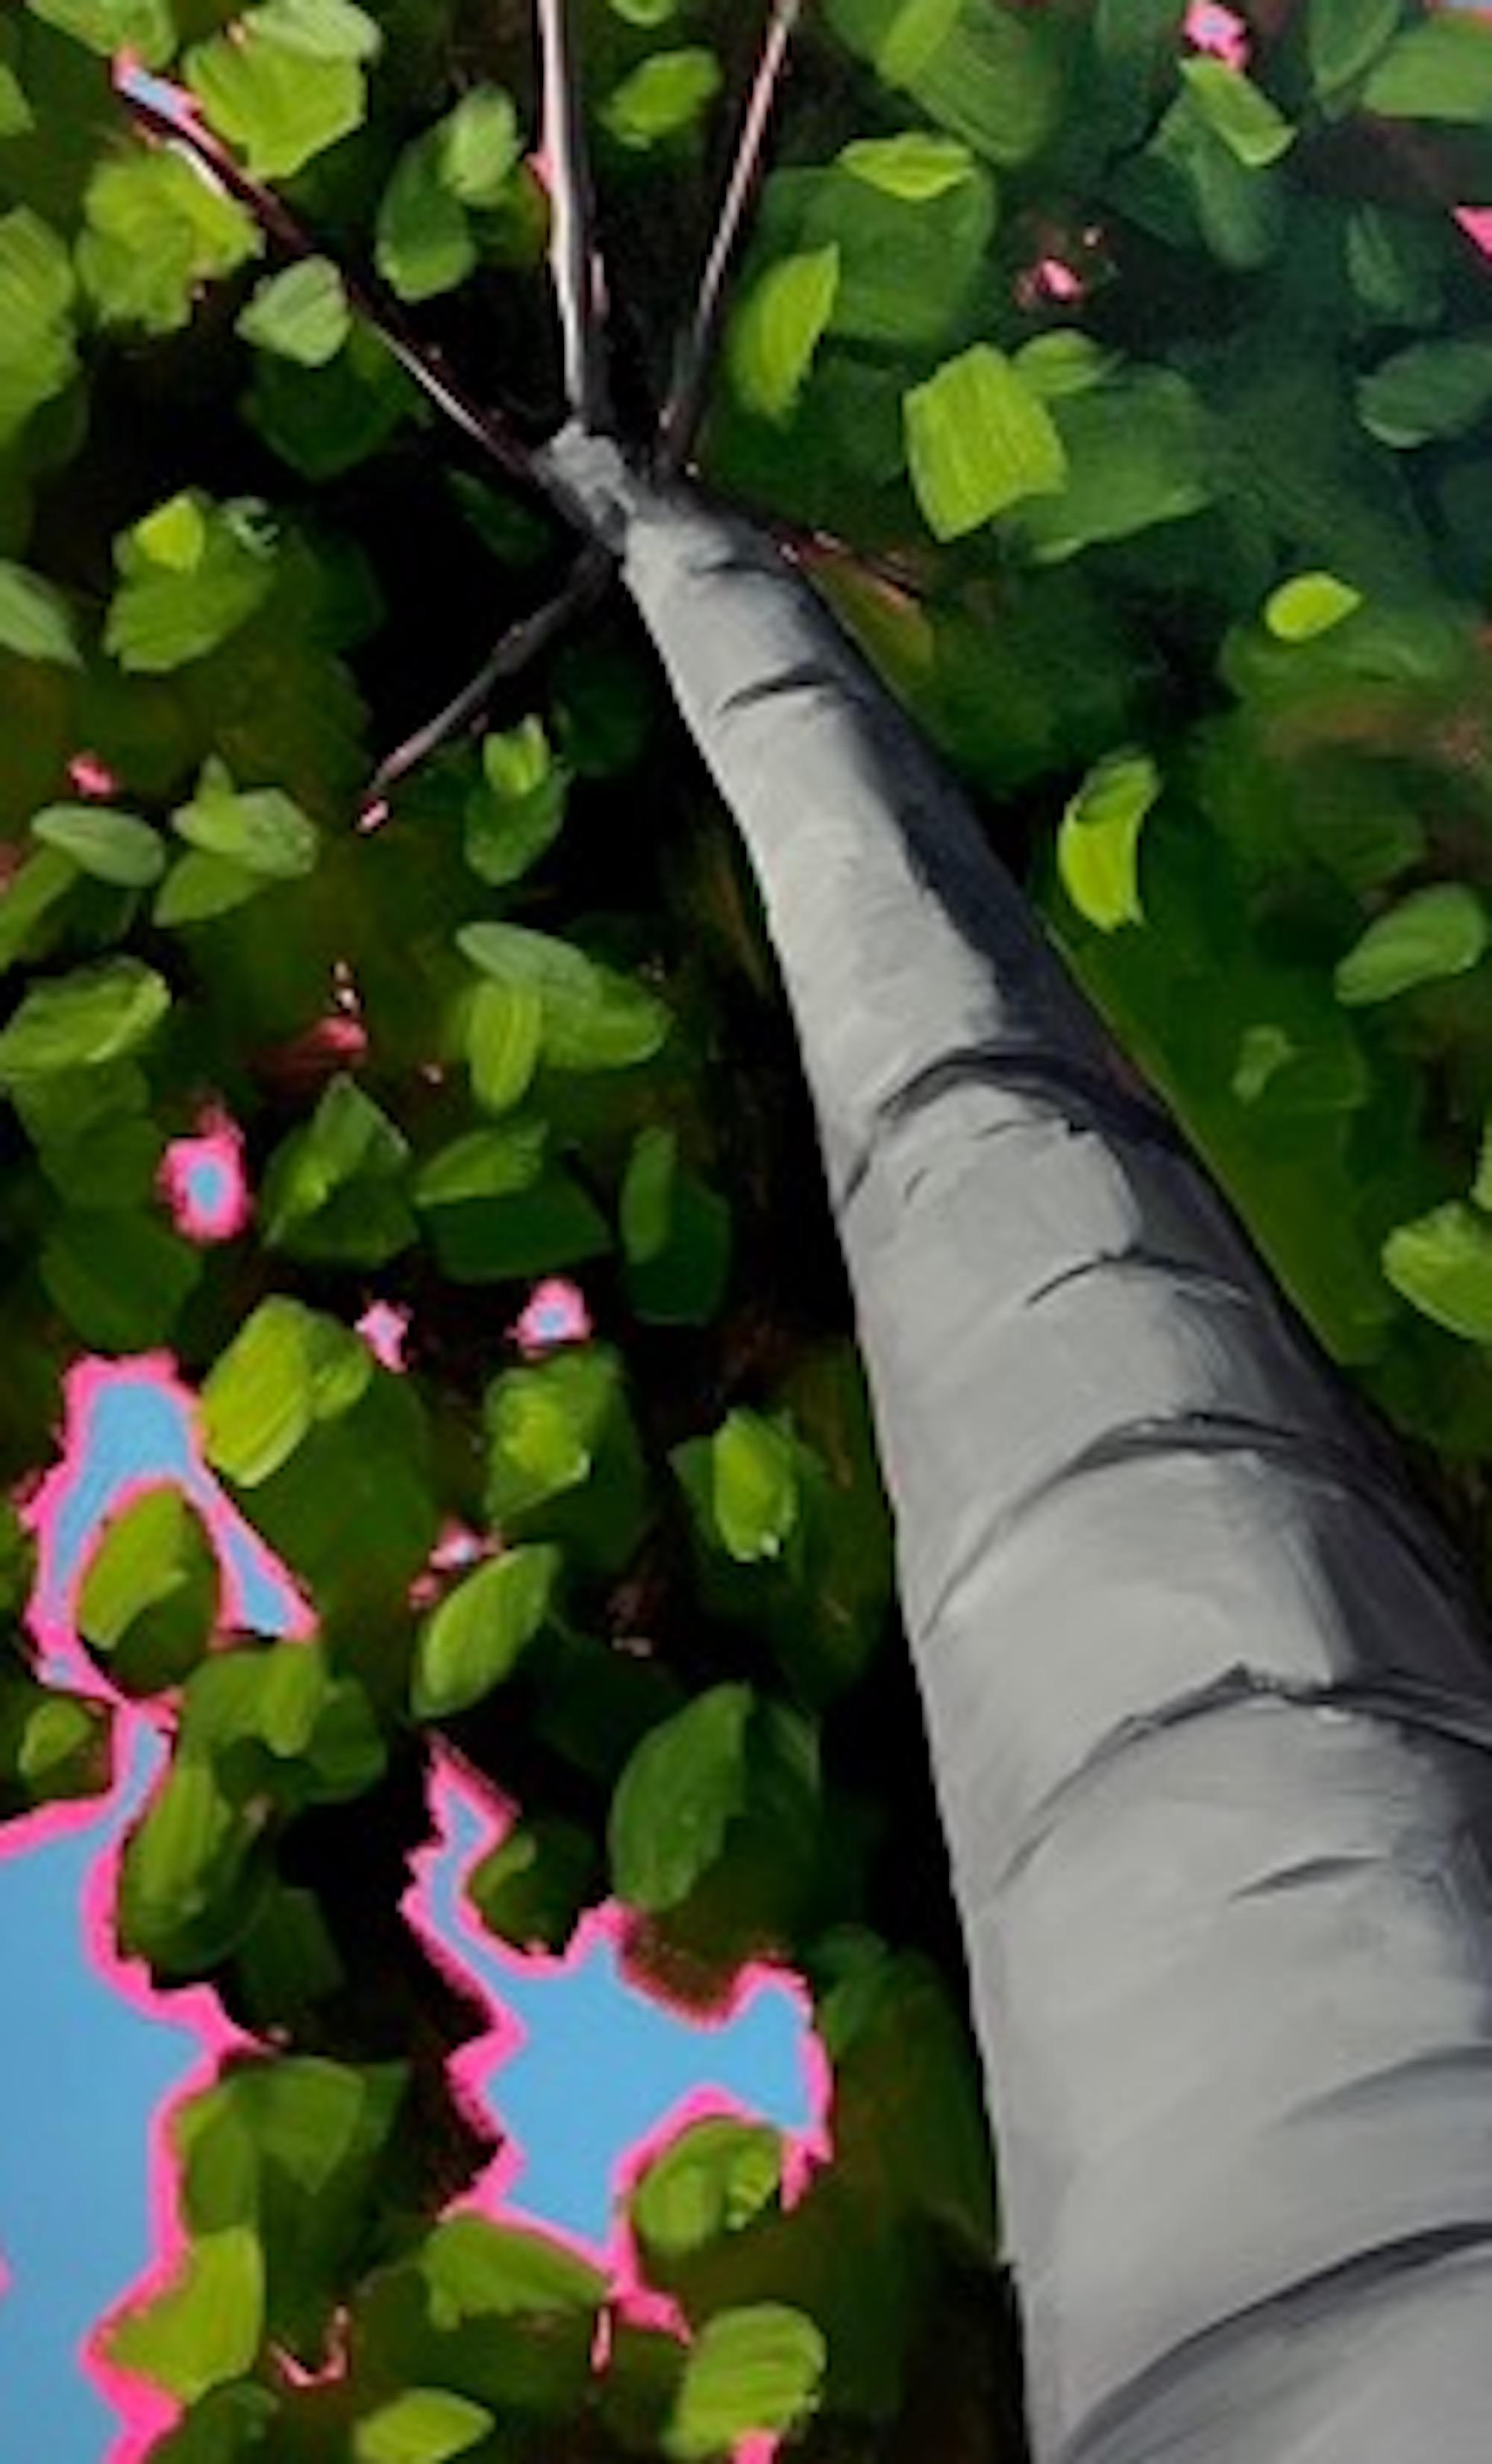 These trees grow in the woods opposite Emily's house. She loves to stand between them and look up. They seem to have grown in perfect harmony - each one making room for the other. This painting is part of a series called Look Up Trees. Emily spends